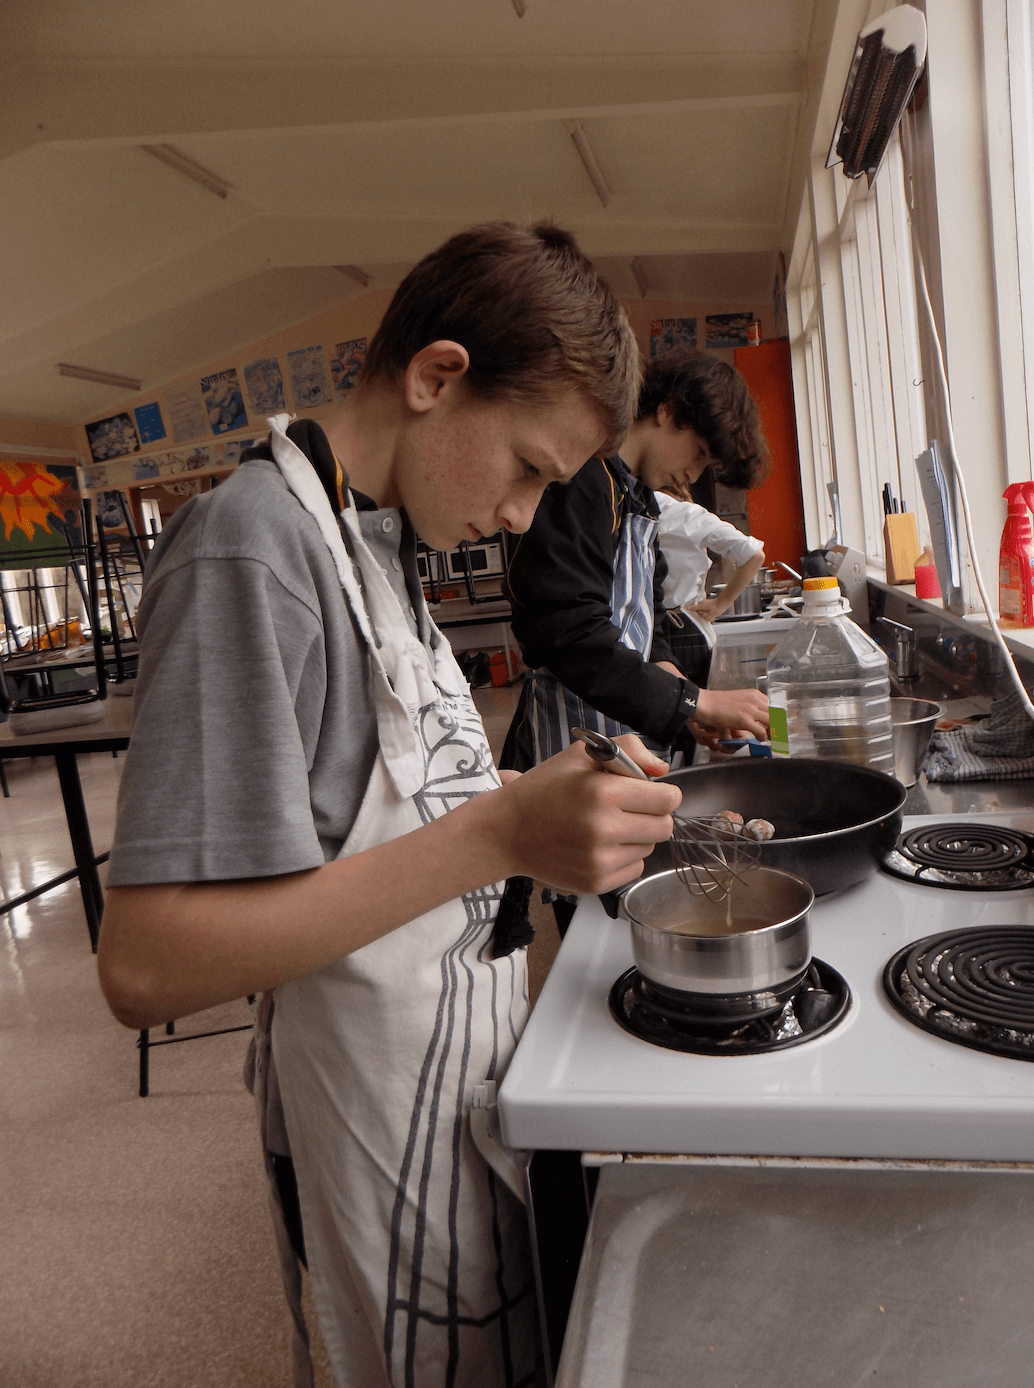 Males cooking in school kitchen